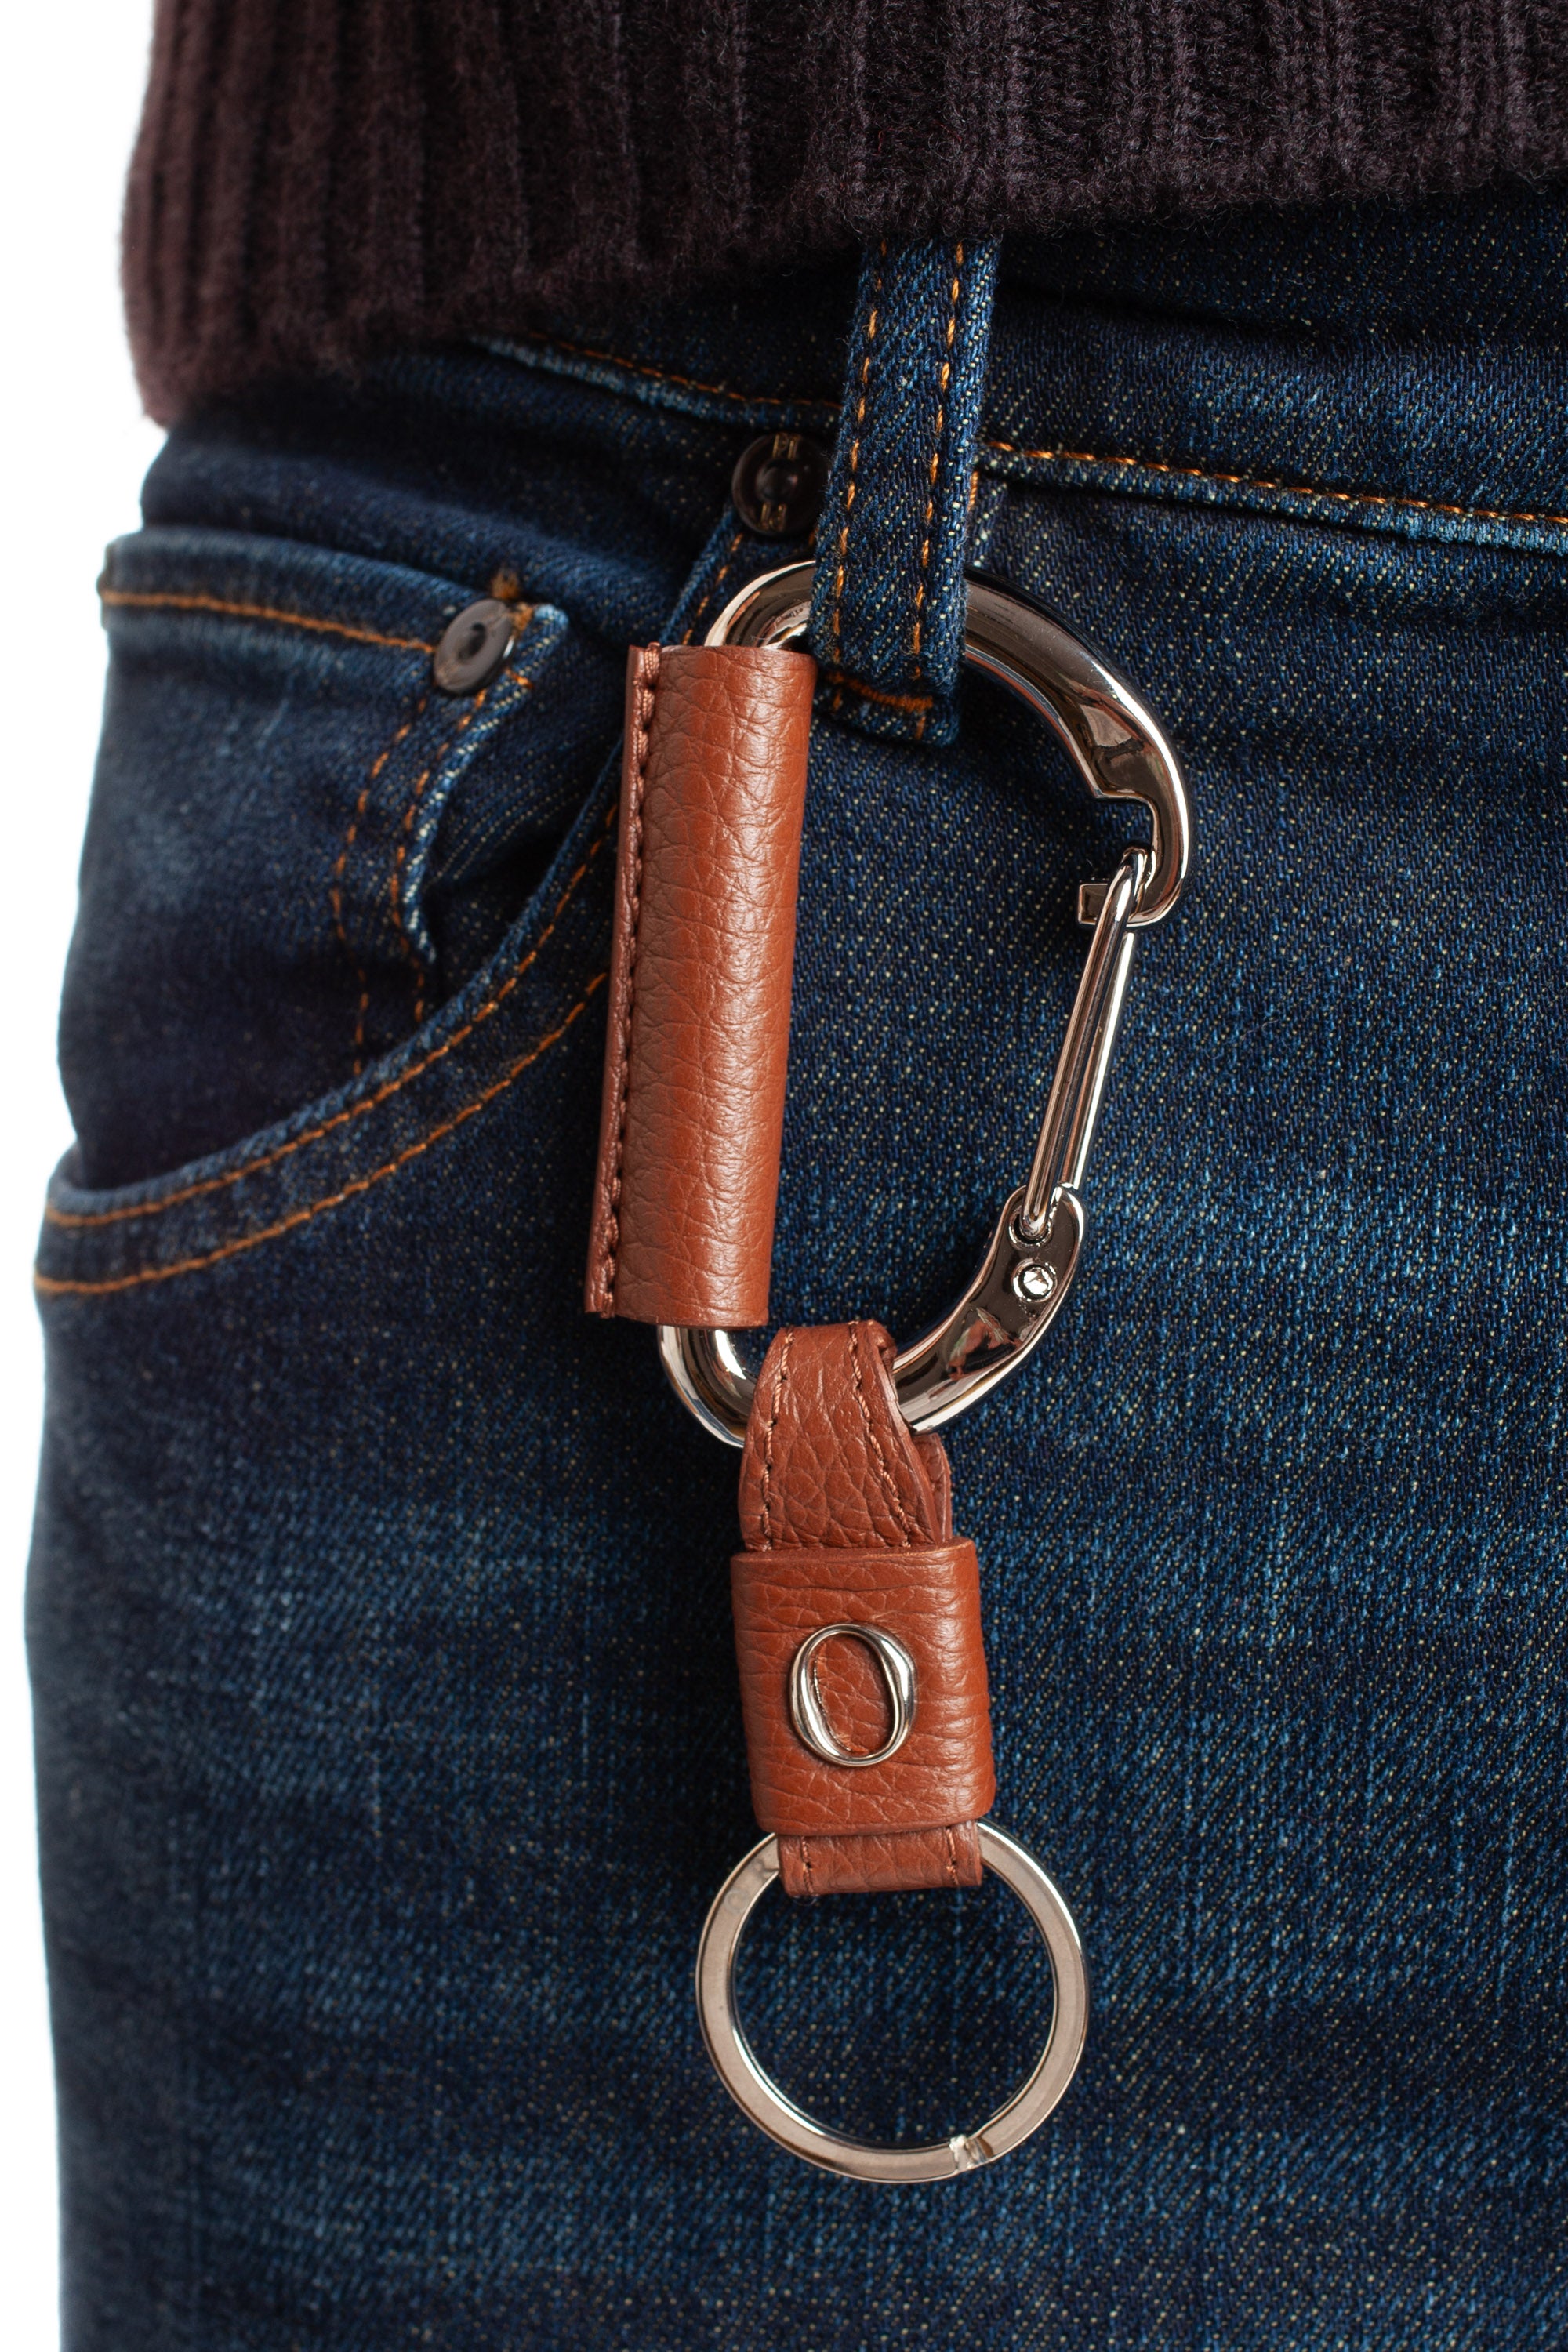 Leather key ring with carabiner